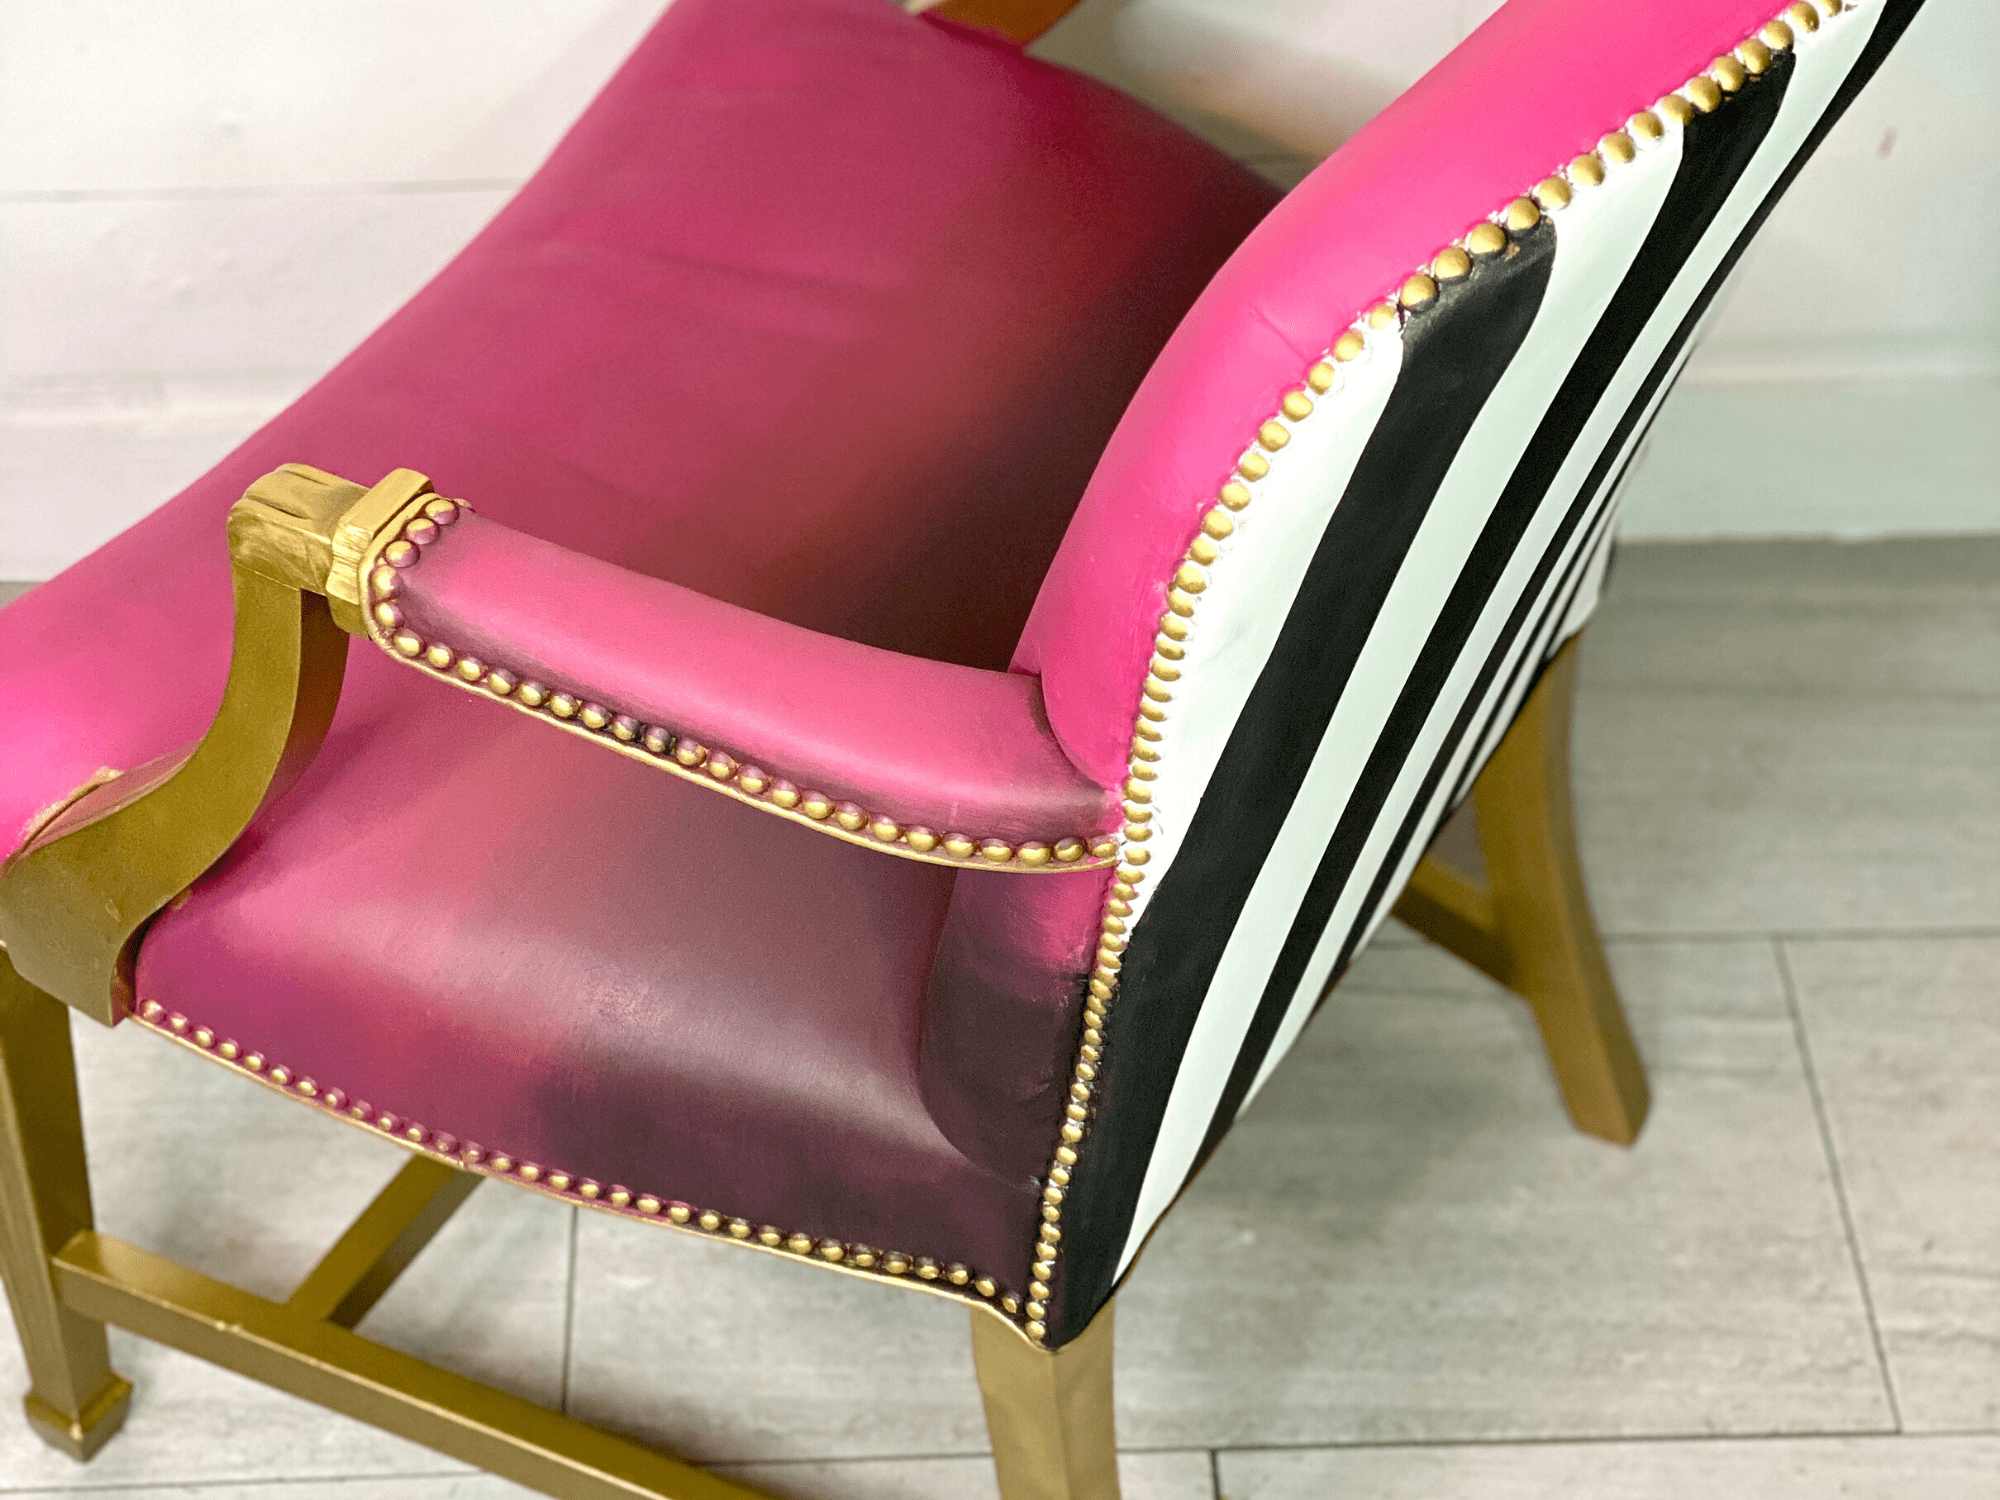 DIY: Painting Leather With Velvet Finishes